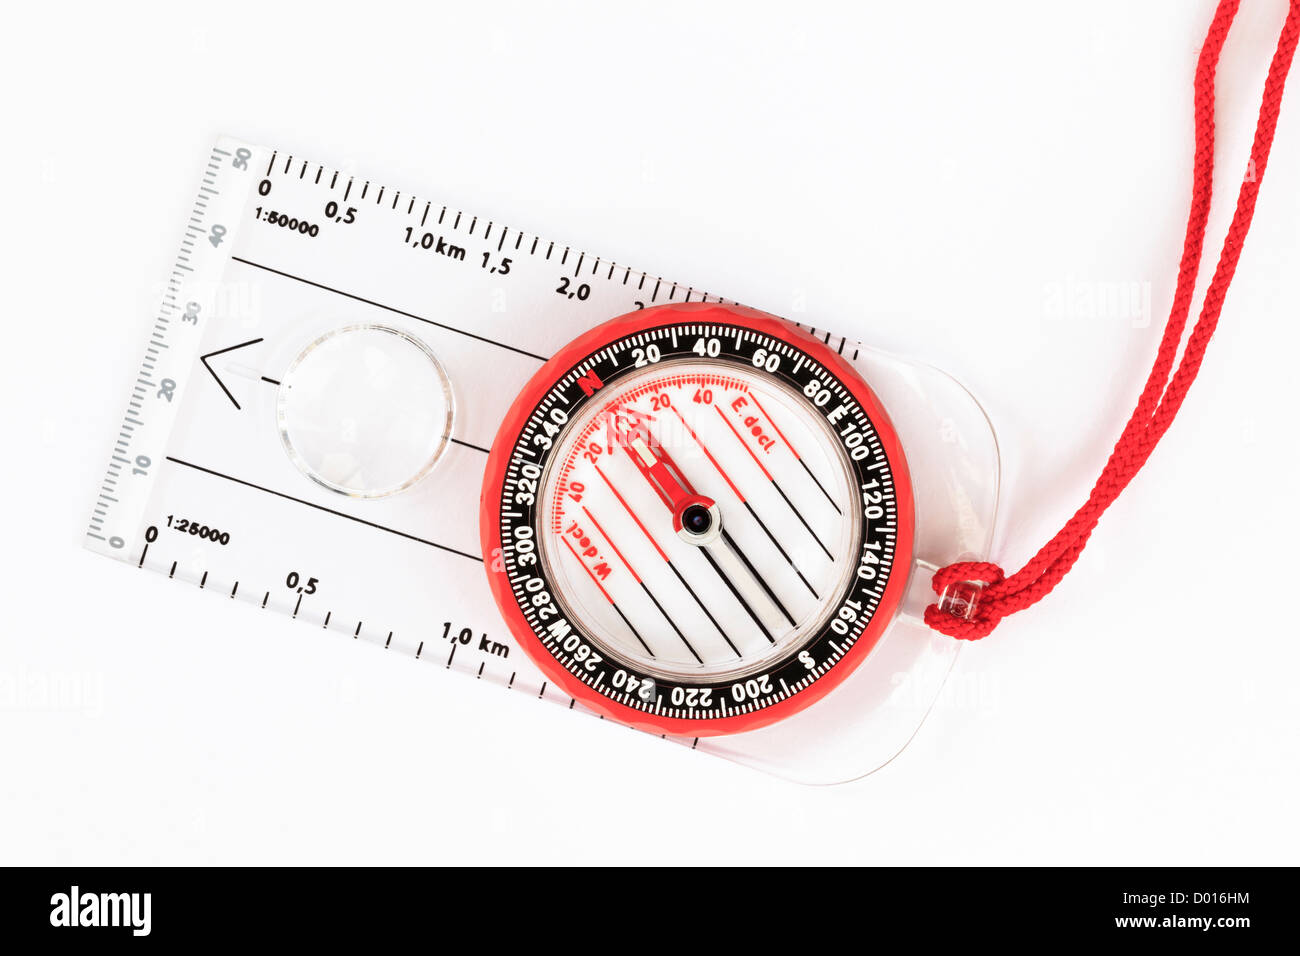 Close-up of a modern orienteering base plate hiking compass pointing north direction for navigation with red lanyard on a white background from above Stock Photo